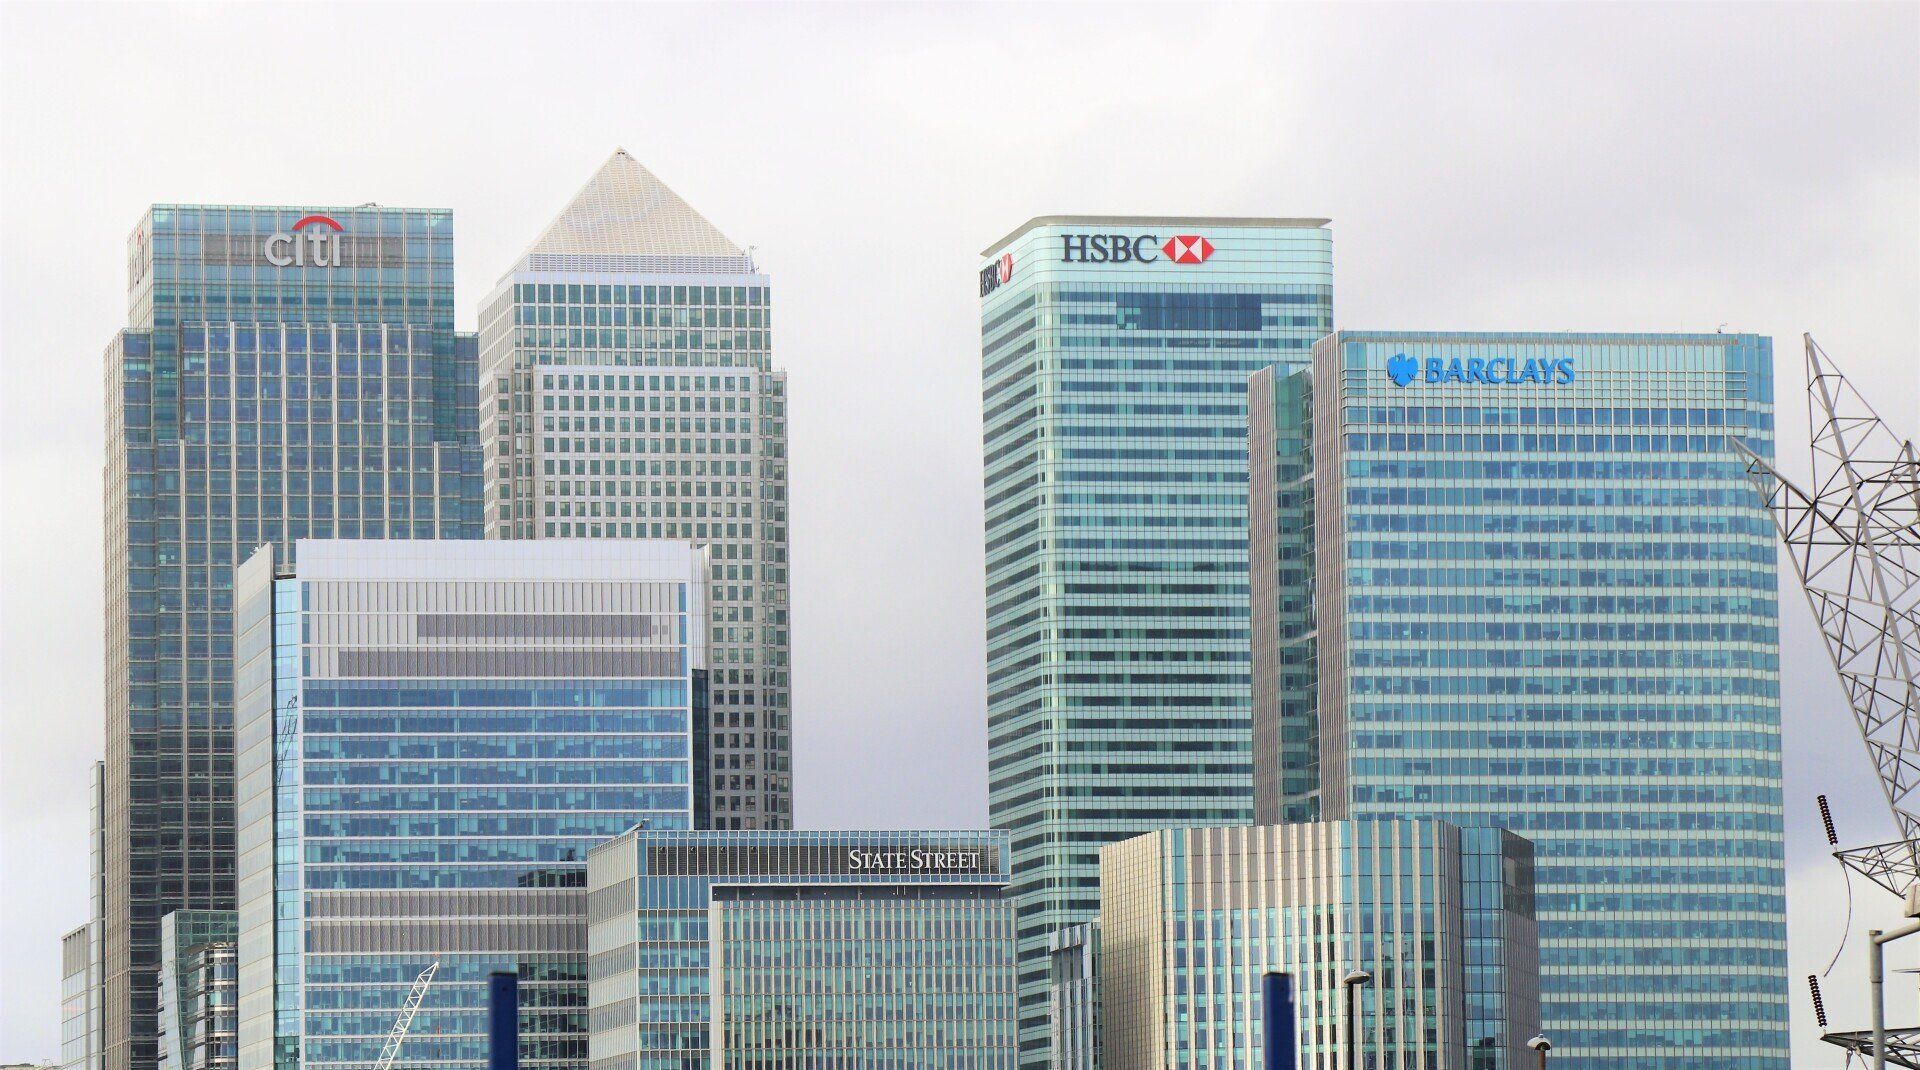 A city skyline with a HSBC bank building in the middle